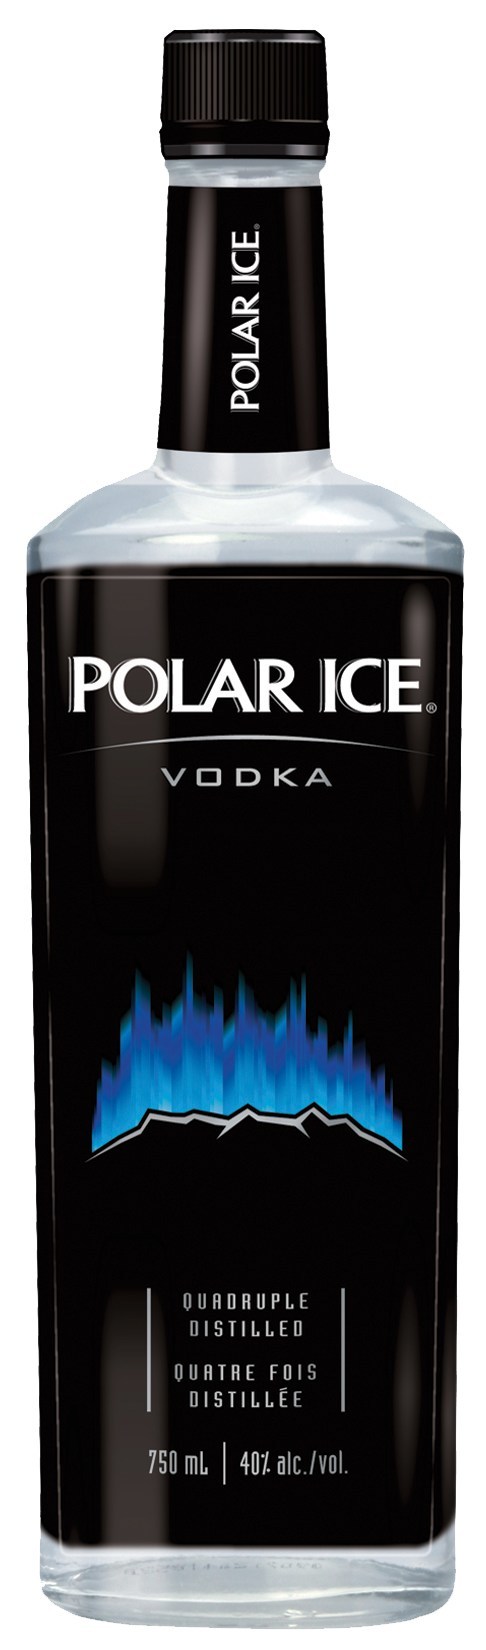 Polar Ice Vodka removes iconic bear from bottle in support of Polar Bears International (CNW Group/Corby Spirit and Wine Communications)